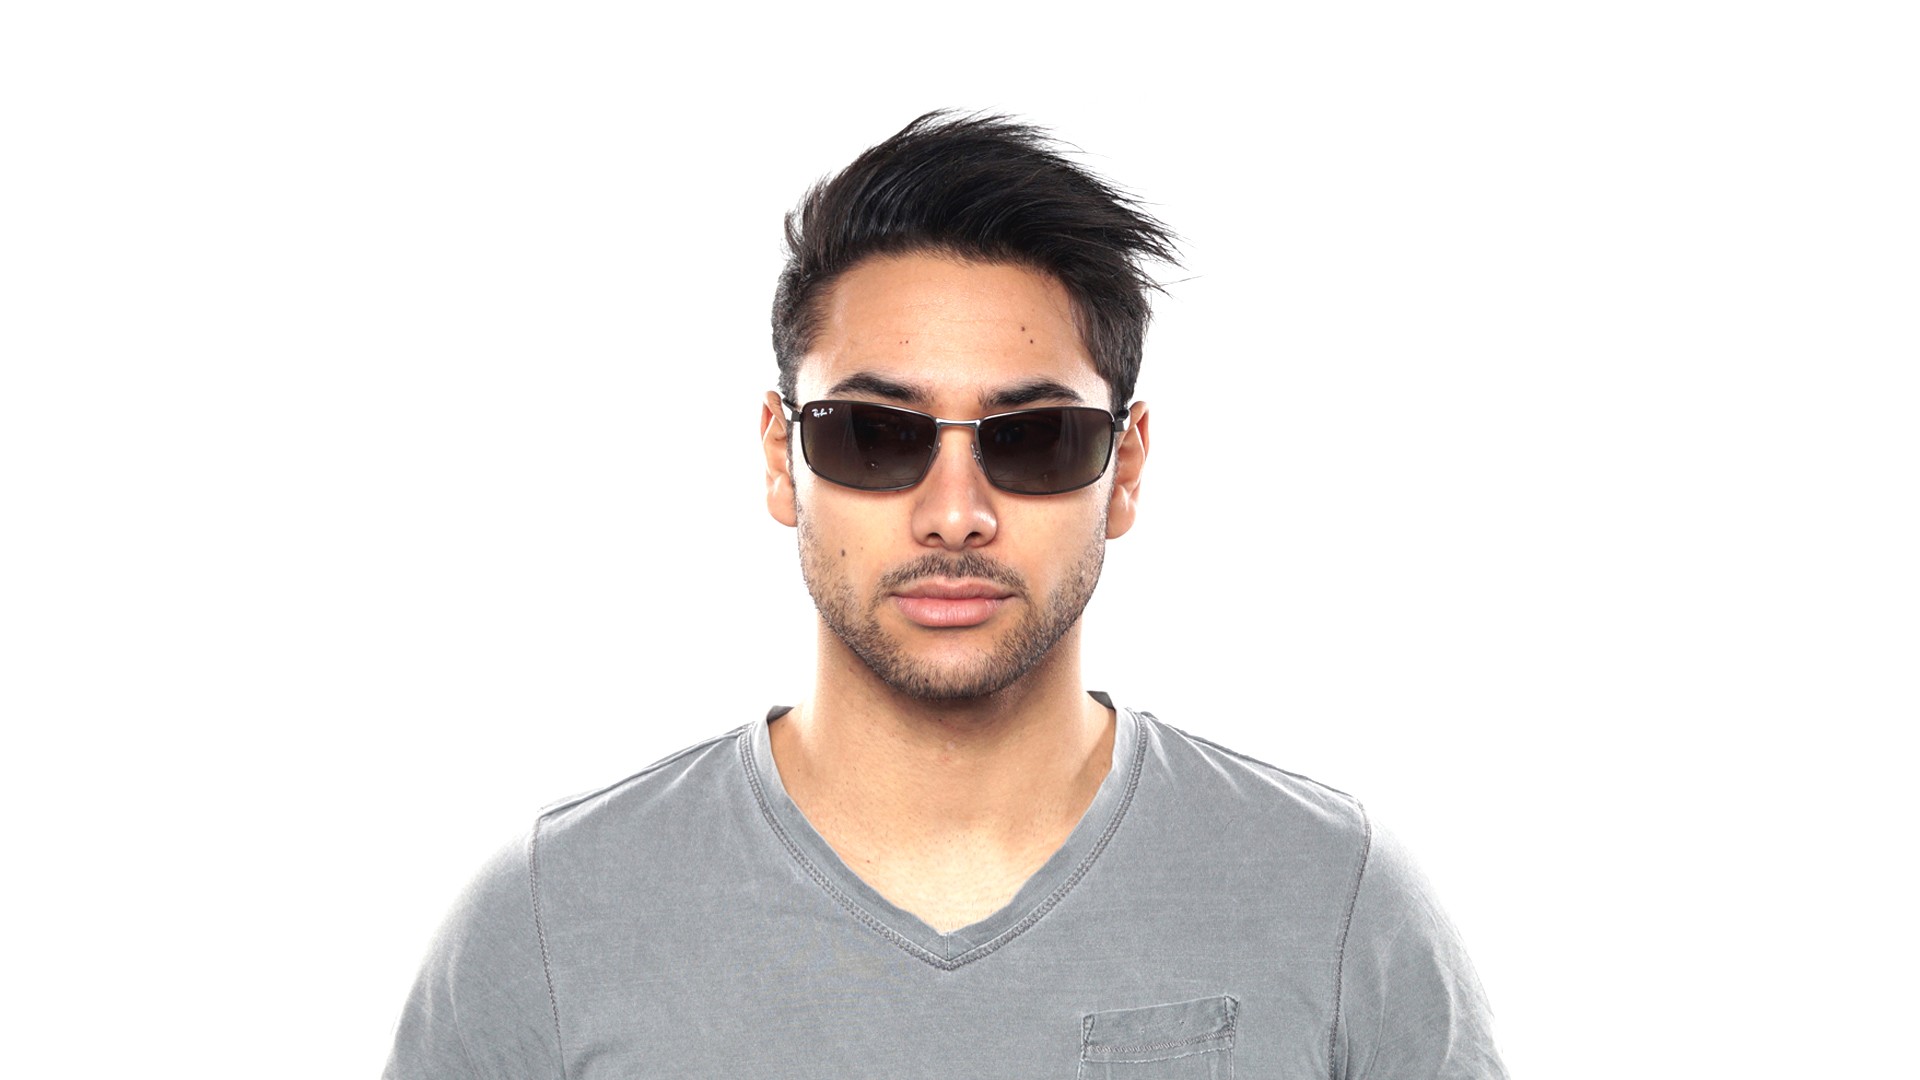 ray ban rb3498 review